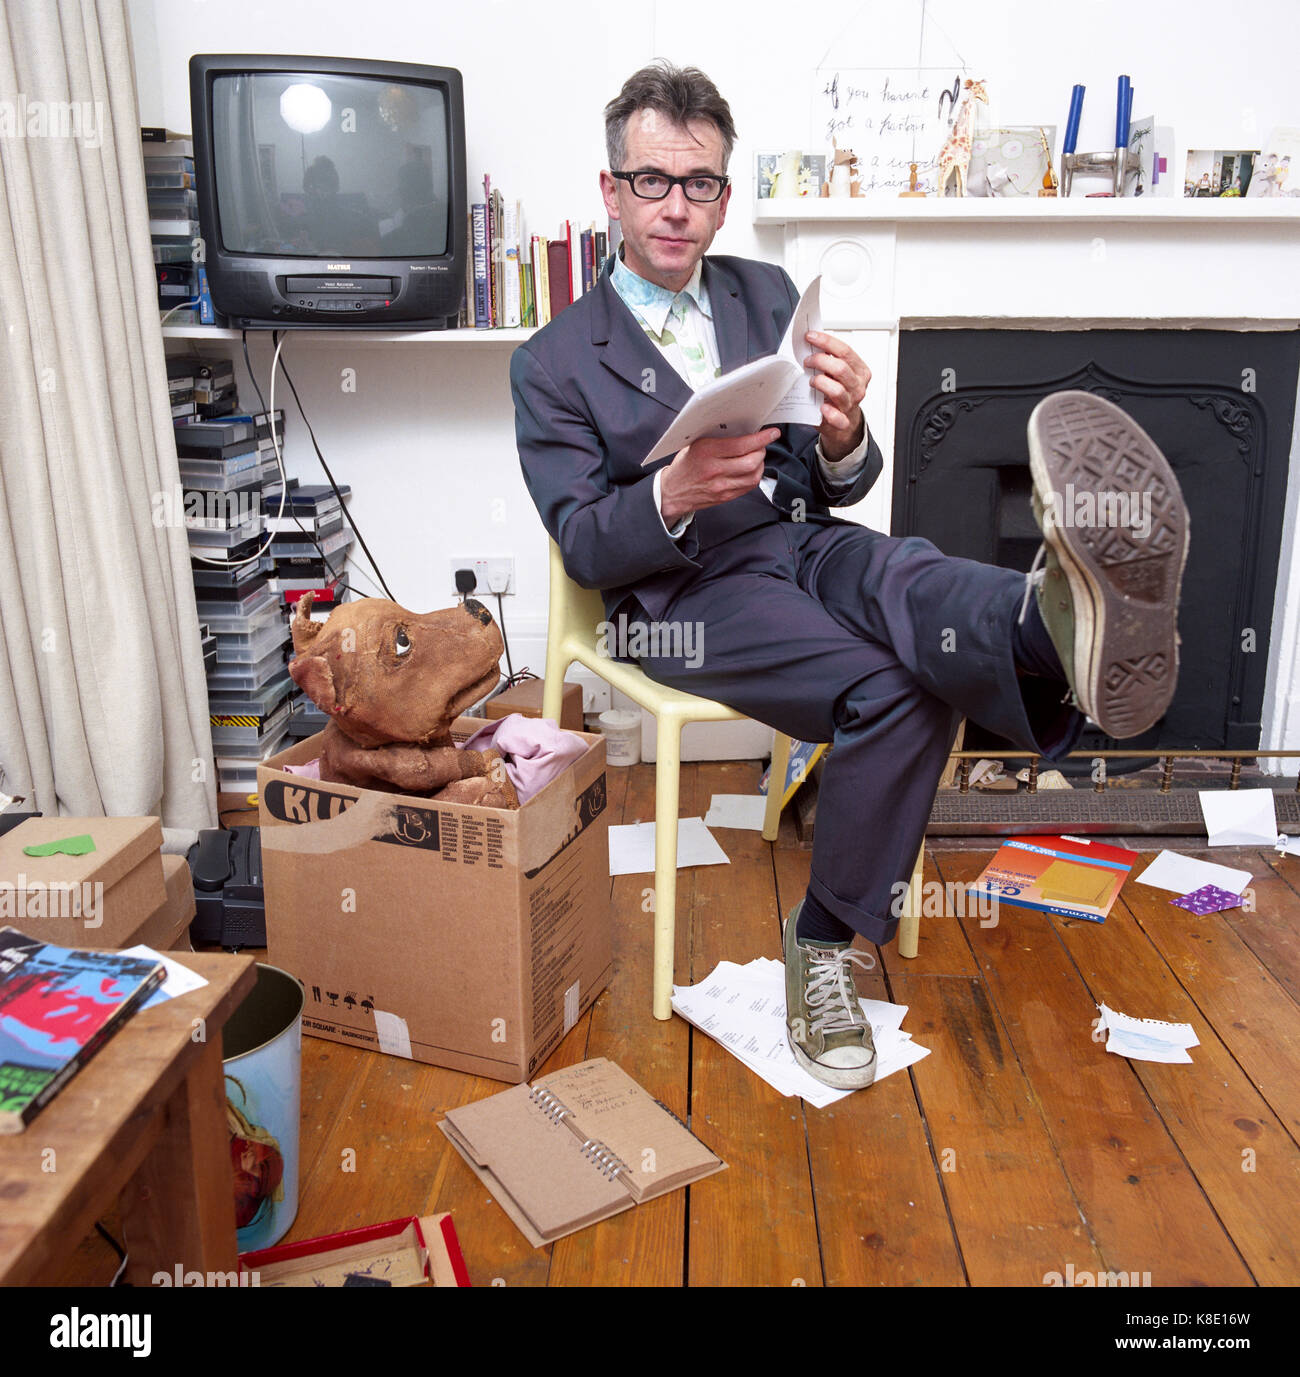 John Hegley , English performance poet, author, comedian, musician and songwriter photographed at his home in Islington London, England, United Kingdom. Stock Photo